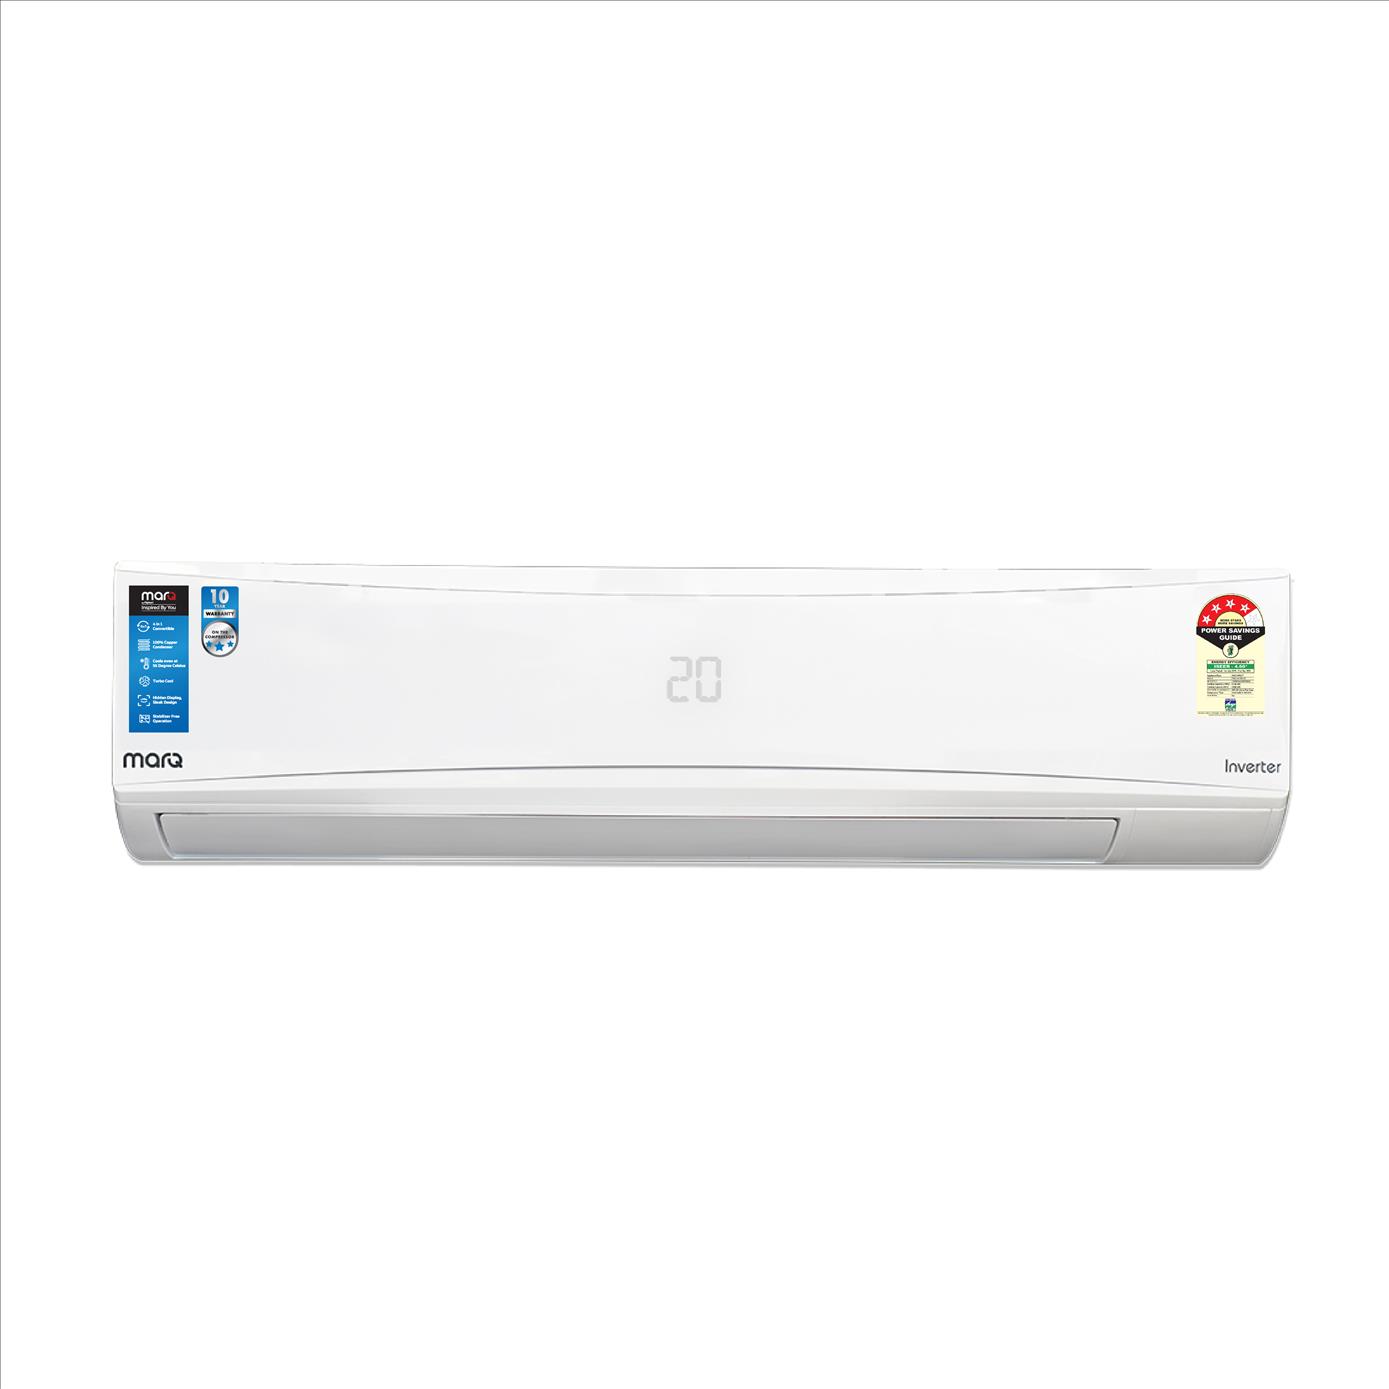 Marq By Flipkart Launches New Range Of Energy Efficient 4-In-1 Convertible Air Conditioners Ahead Of Summers